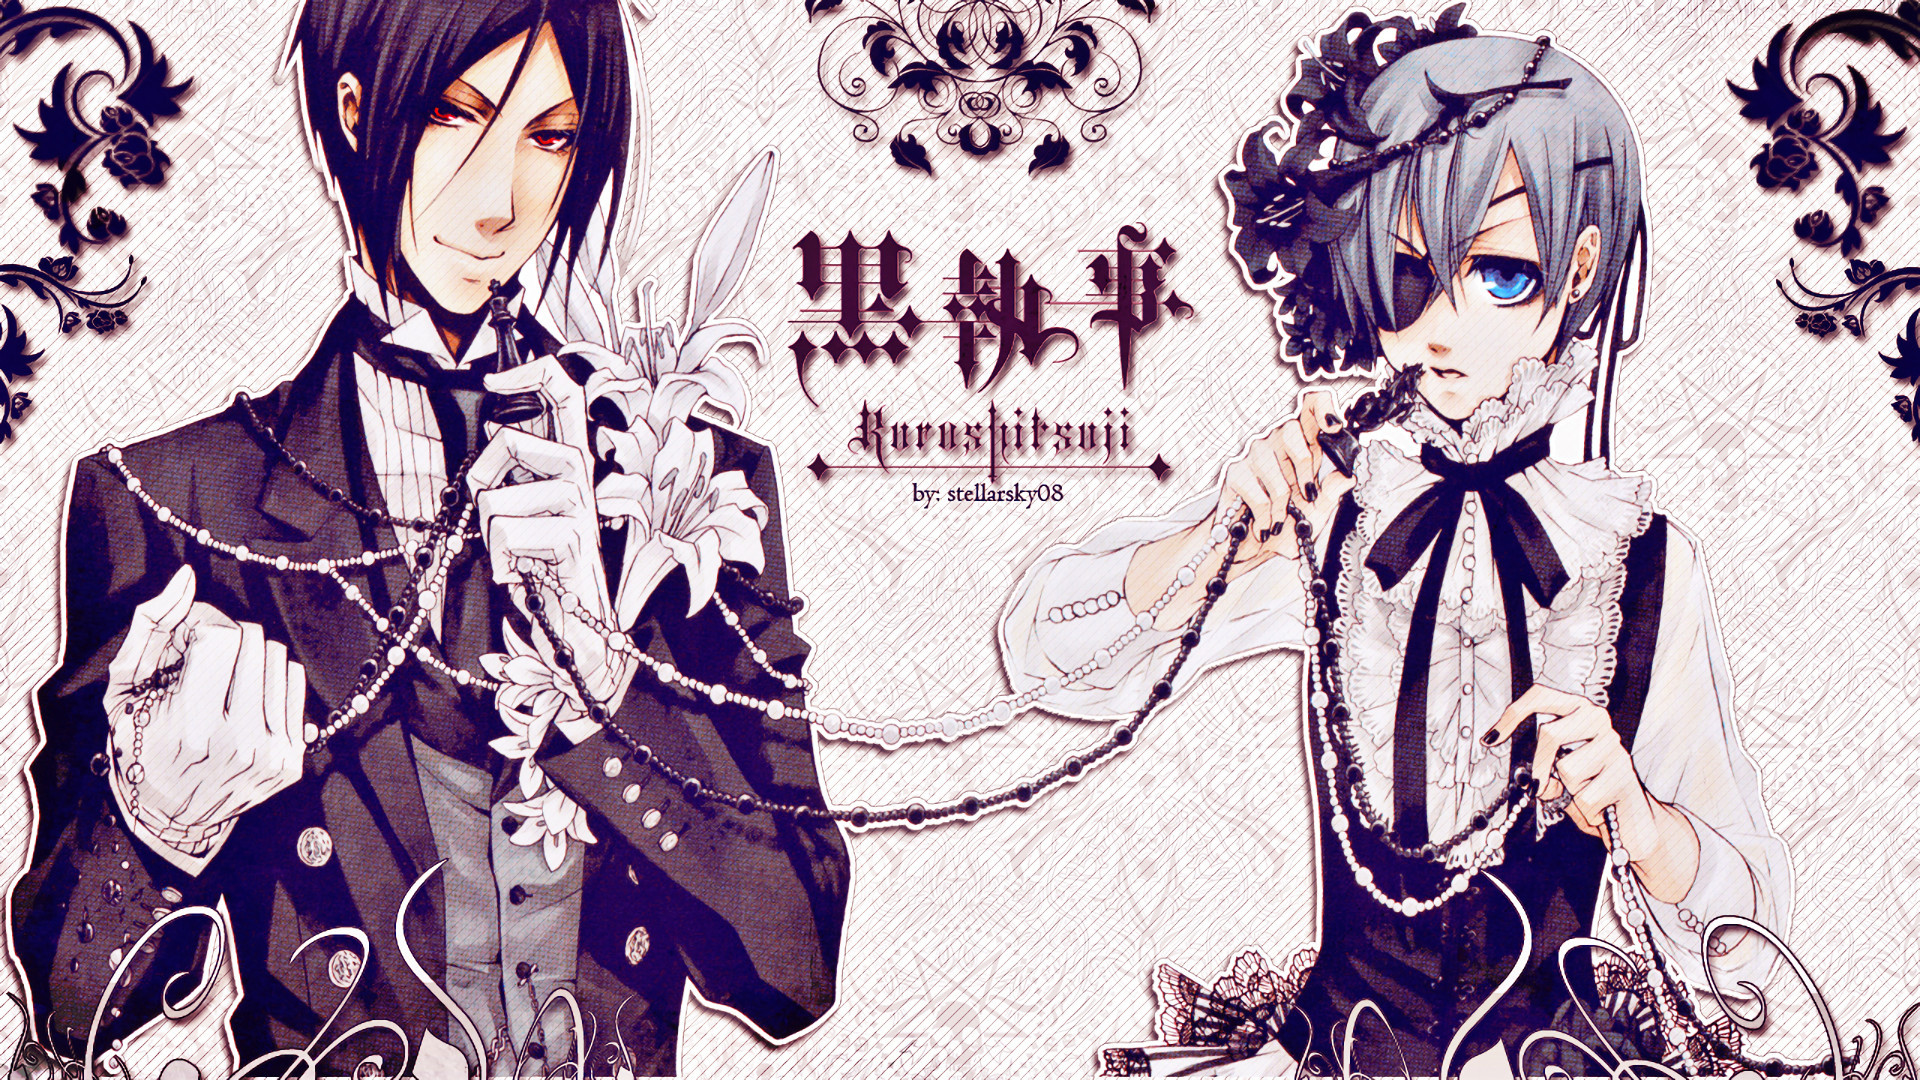 1920x1080 3020x2060 Lau - The Chinese Man From Kuroshitsuji images Lau and Other  Black Butler Characters HD wallpaper and background photos